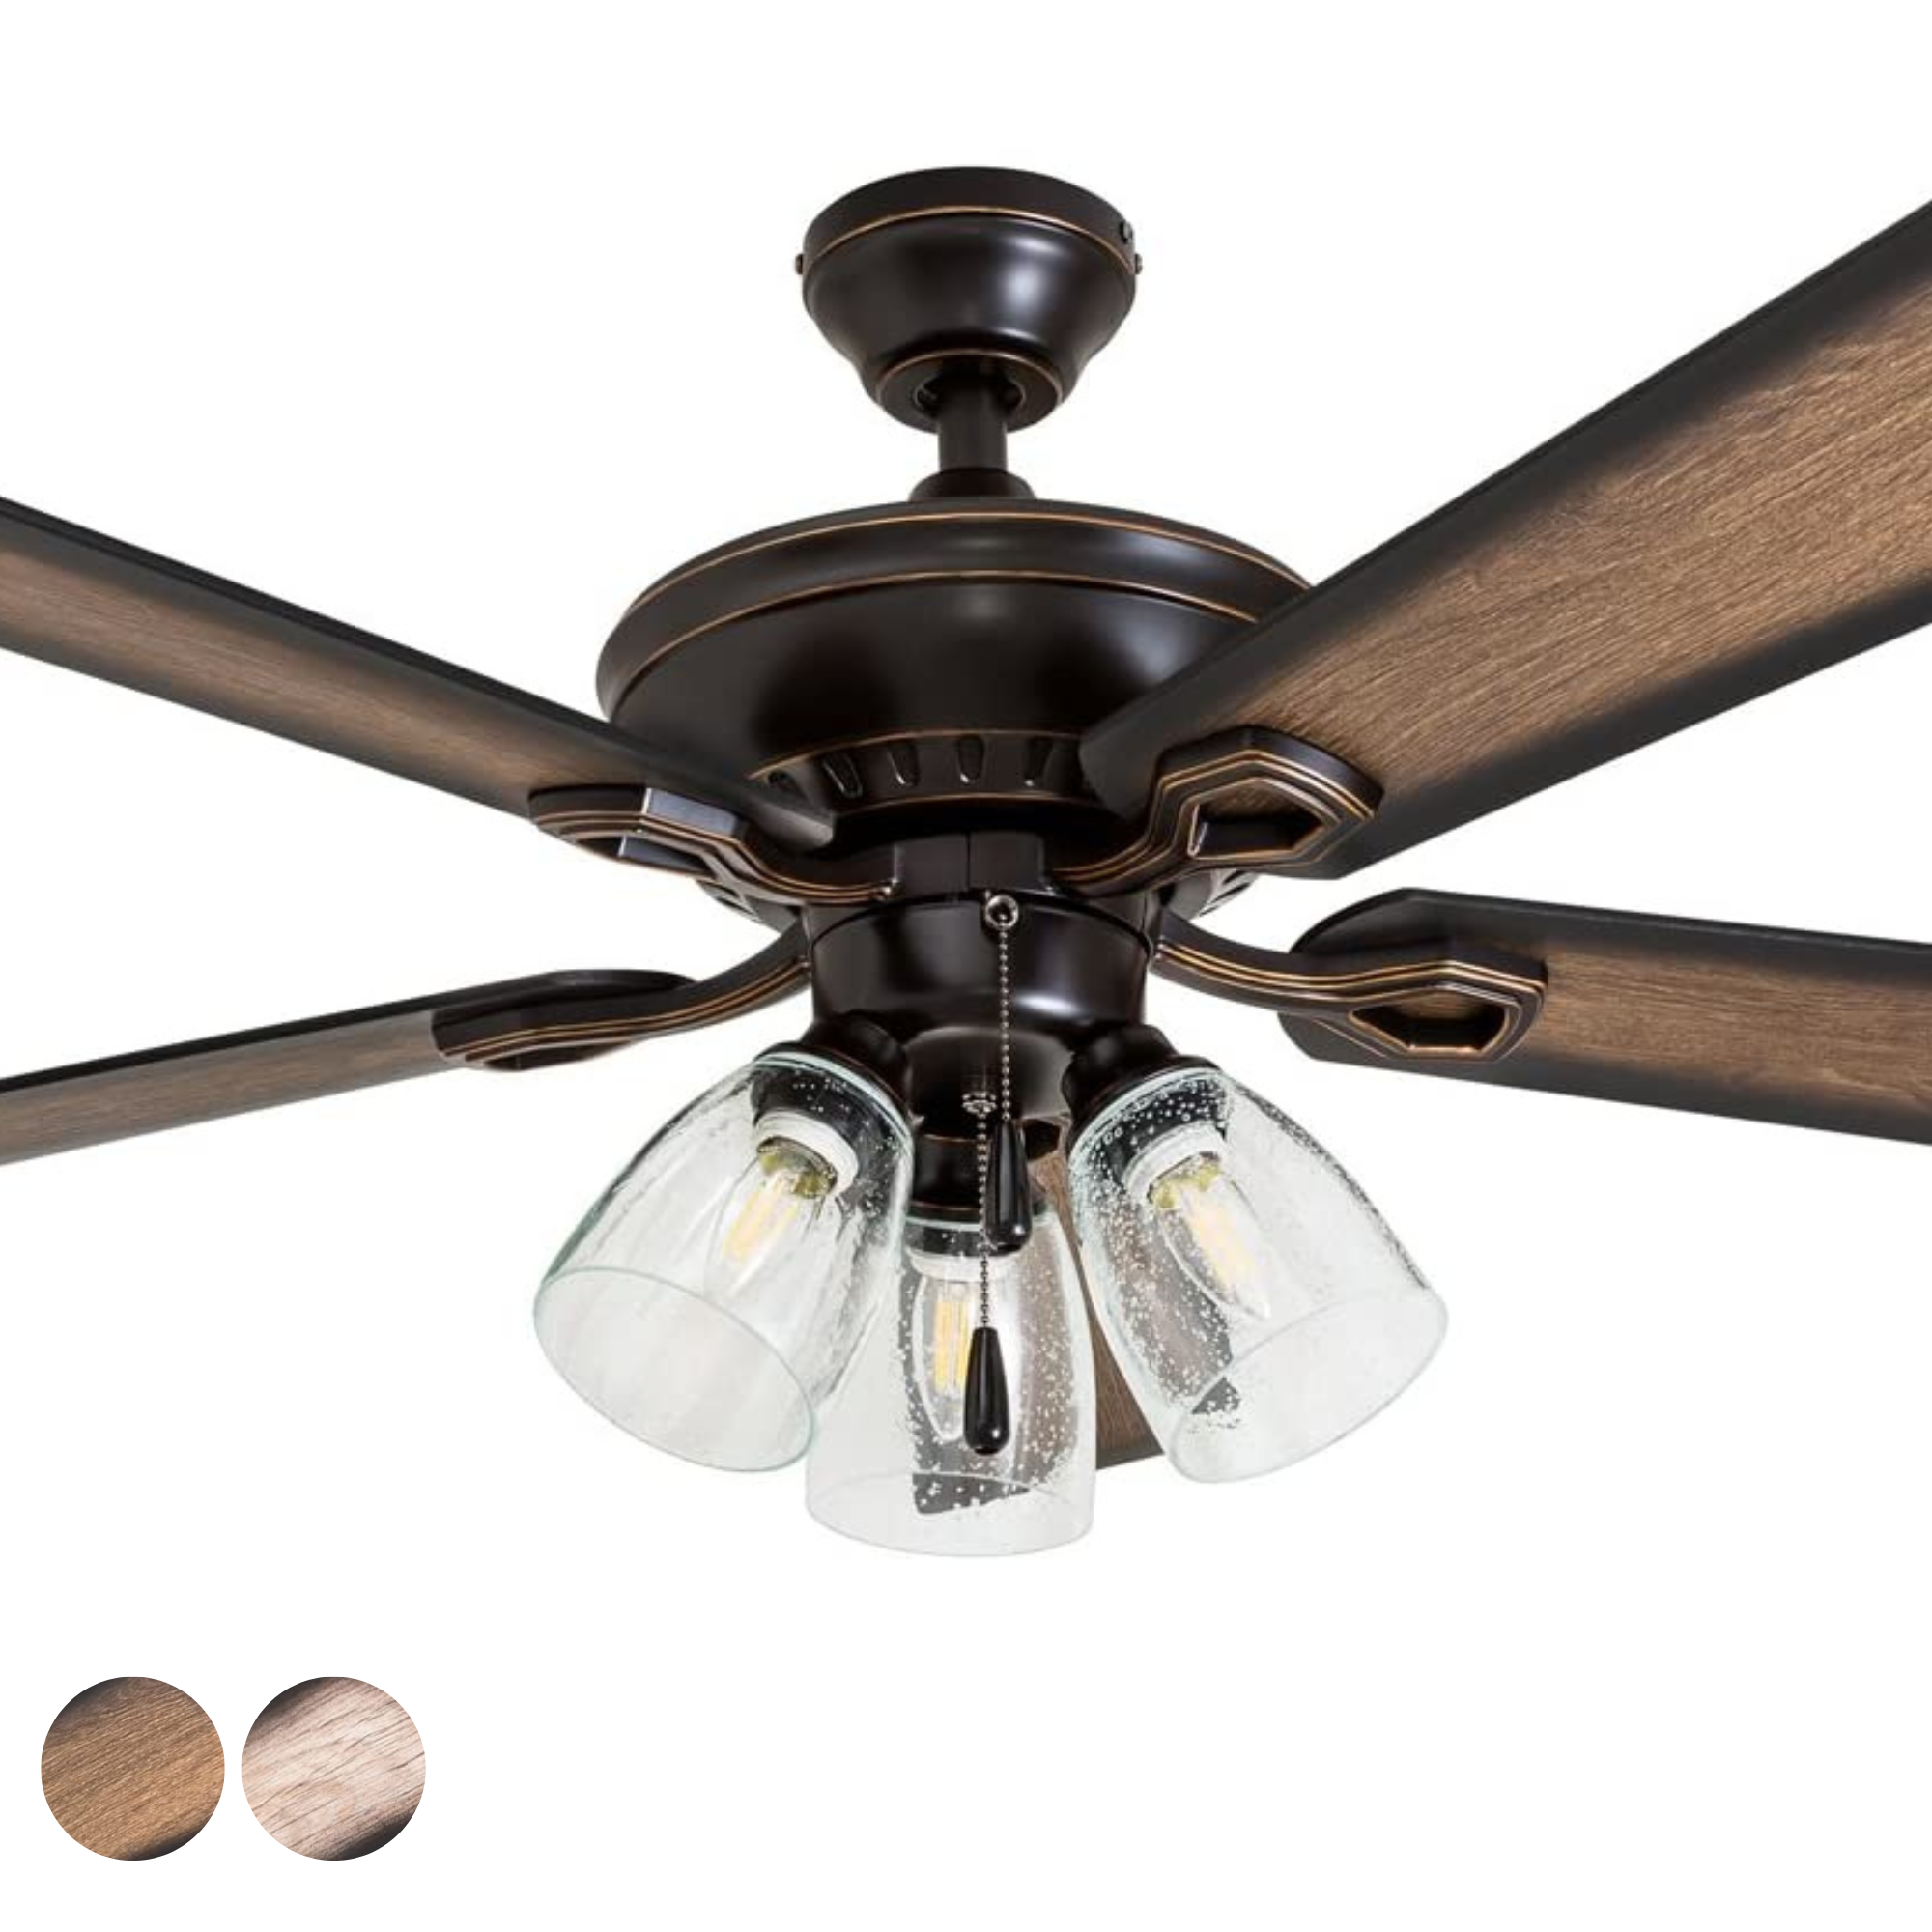 52 Inch Glenmont, Oil Rubbed Bronze, Pull Chain, Ceiling Fan by Prominence Home